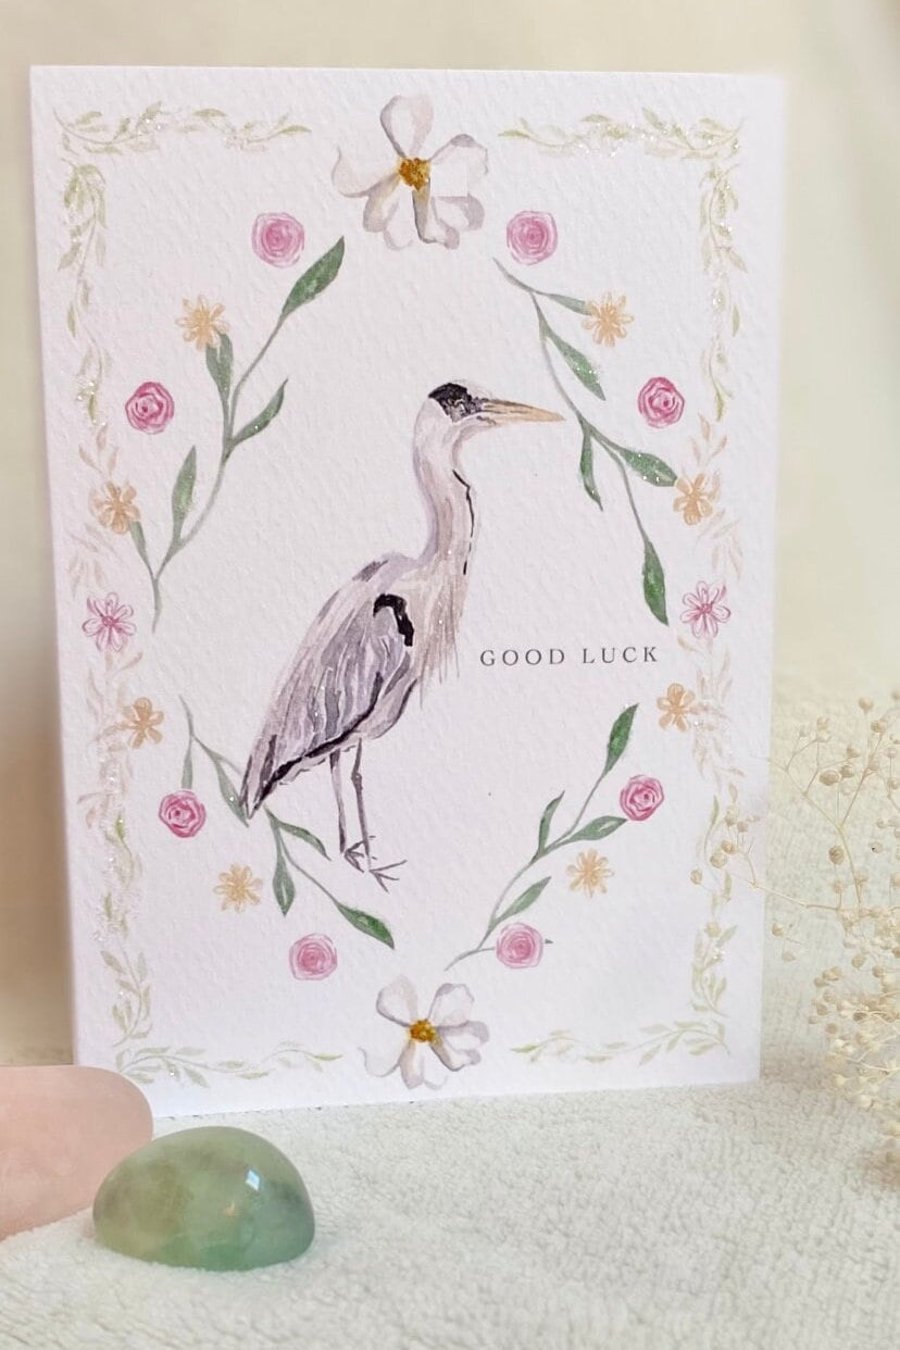 Regents Park Inspired Heron with opulent border Greeting Card for a variety of o